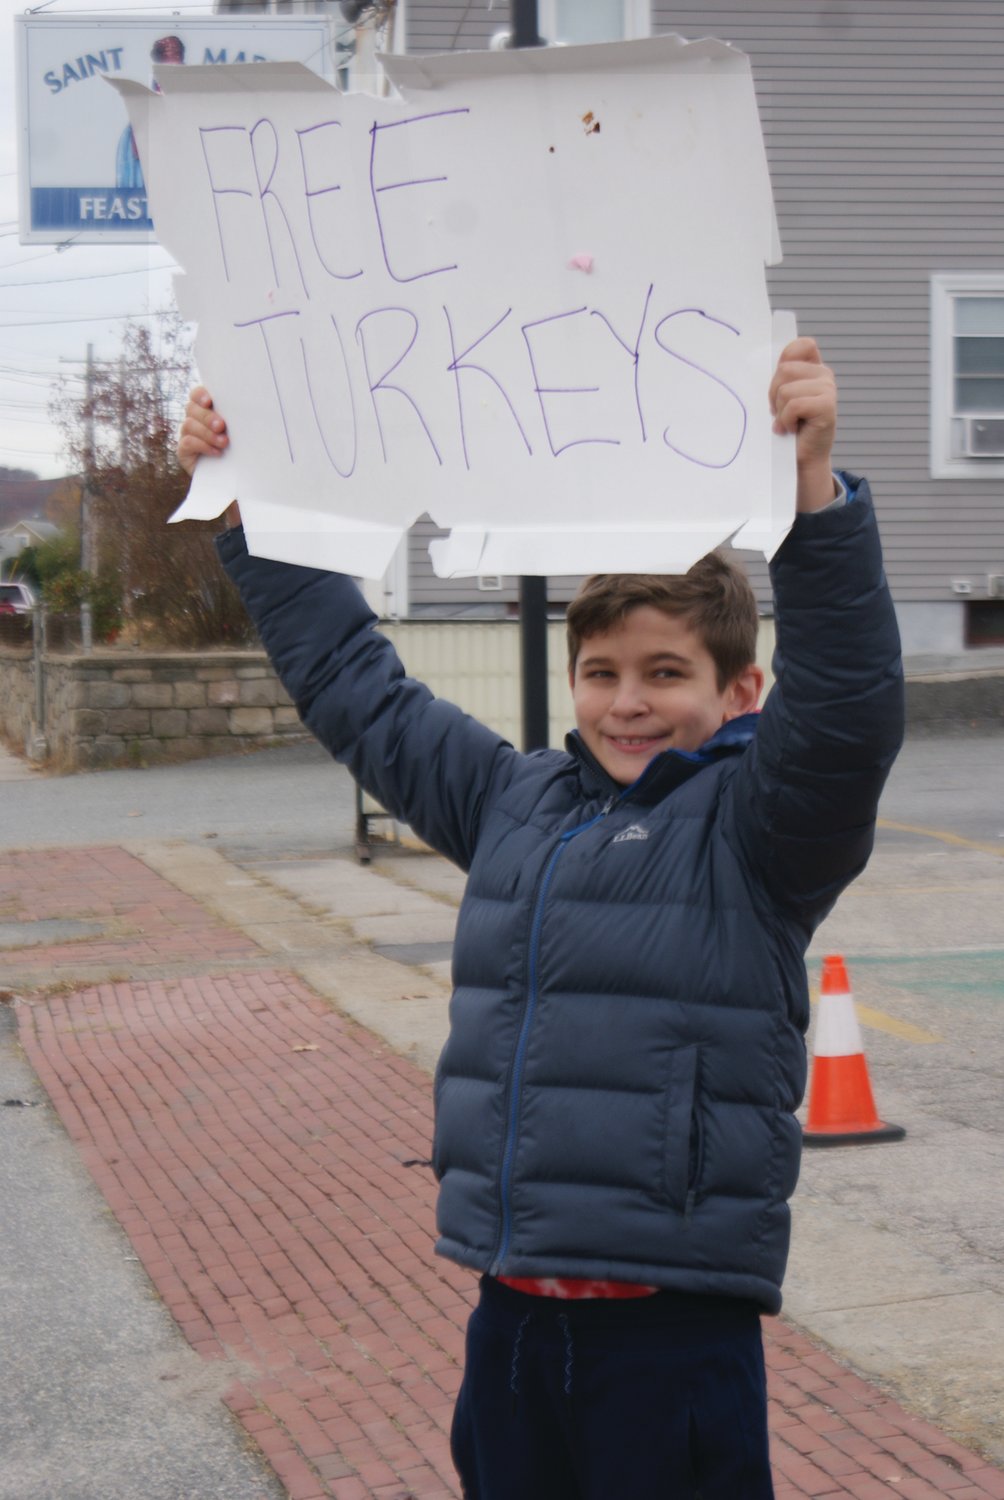 GETTING THE WORD OUT: Holding up a sign at the St. Mary’s Feast Society to draw in more people in need to receive a free frozen turkey is Gunner DeCiccio, age 10.